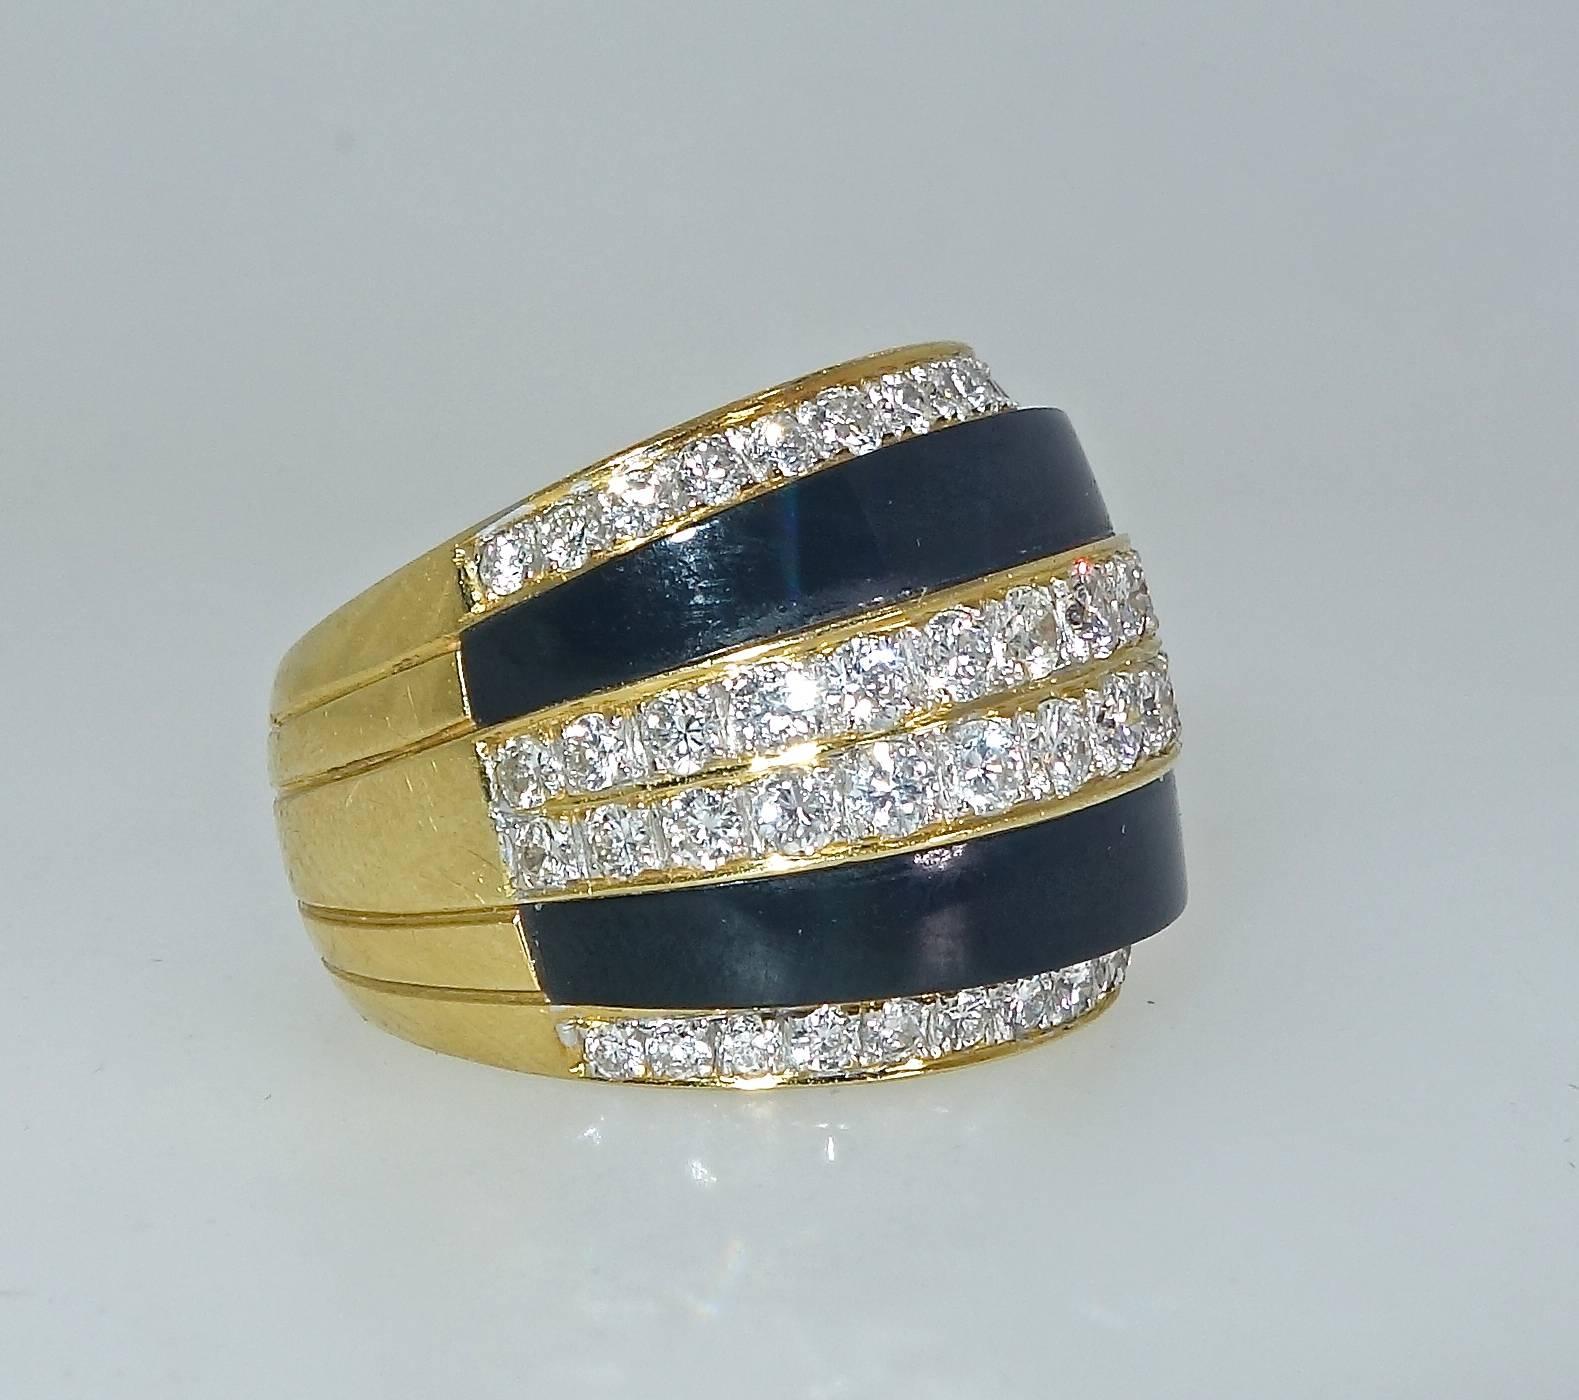 Fine white diamonds - brilliant cut, well matched, near colorless and very slightly included (H/VS) these 60 diamonds weigh approximately 2.35 cts.  Bands of onyx accent the white diamonds creating a bold and striking color contrast.  This ring is a